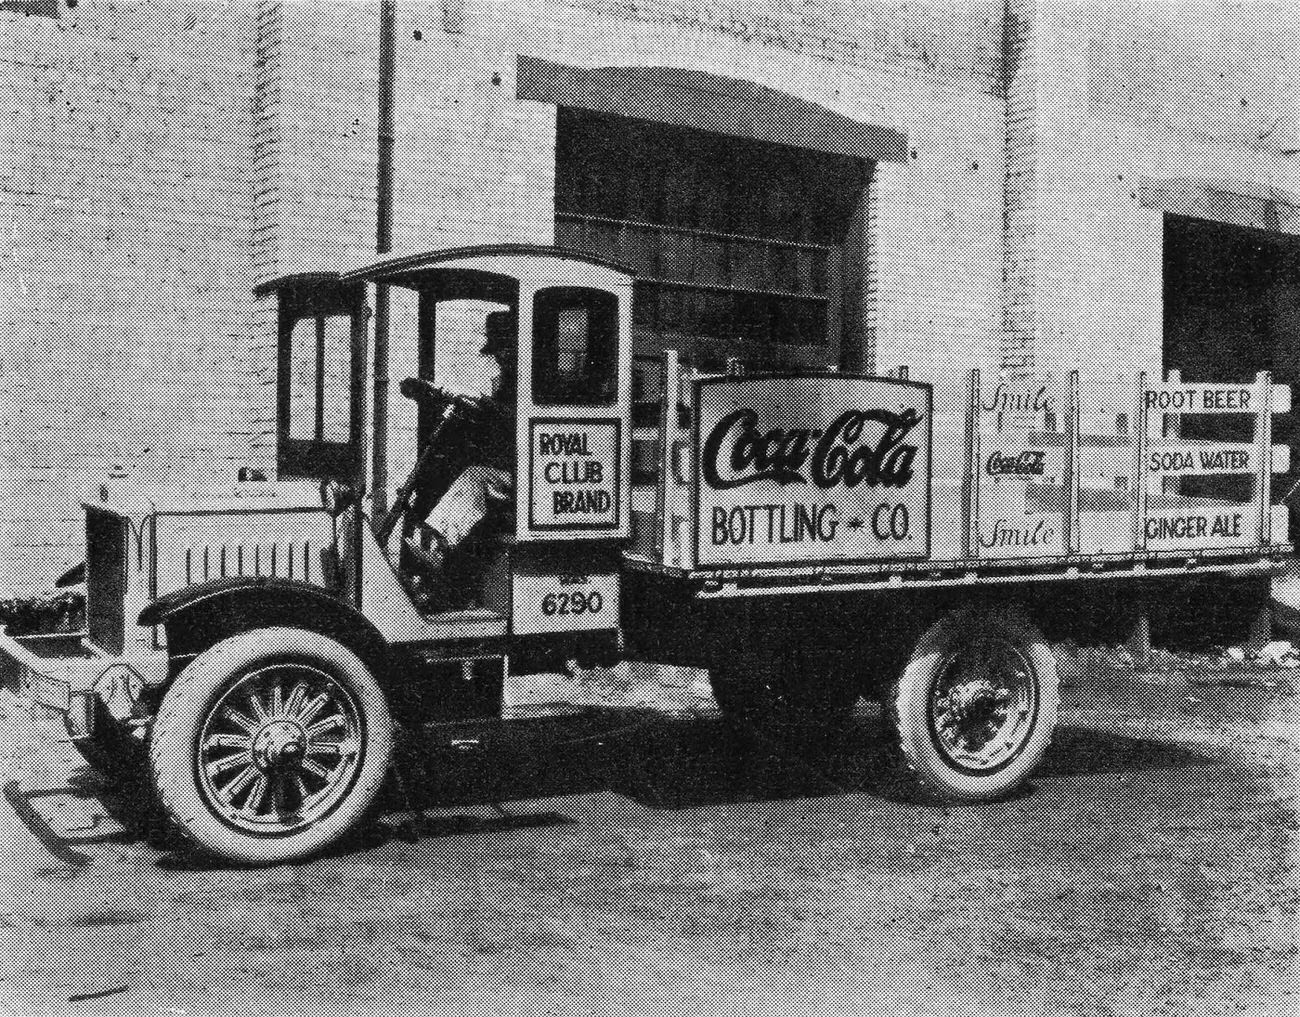 A 1921 photo from The Coca-Cola Bottler magazine.